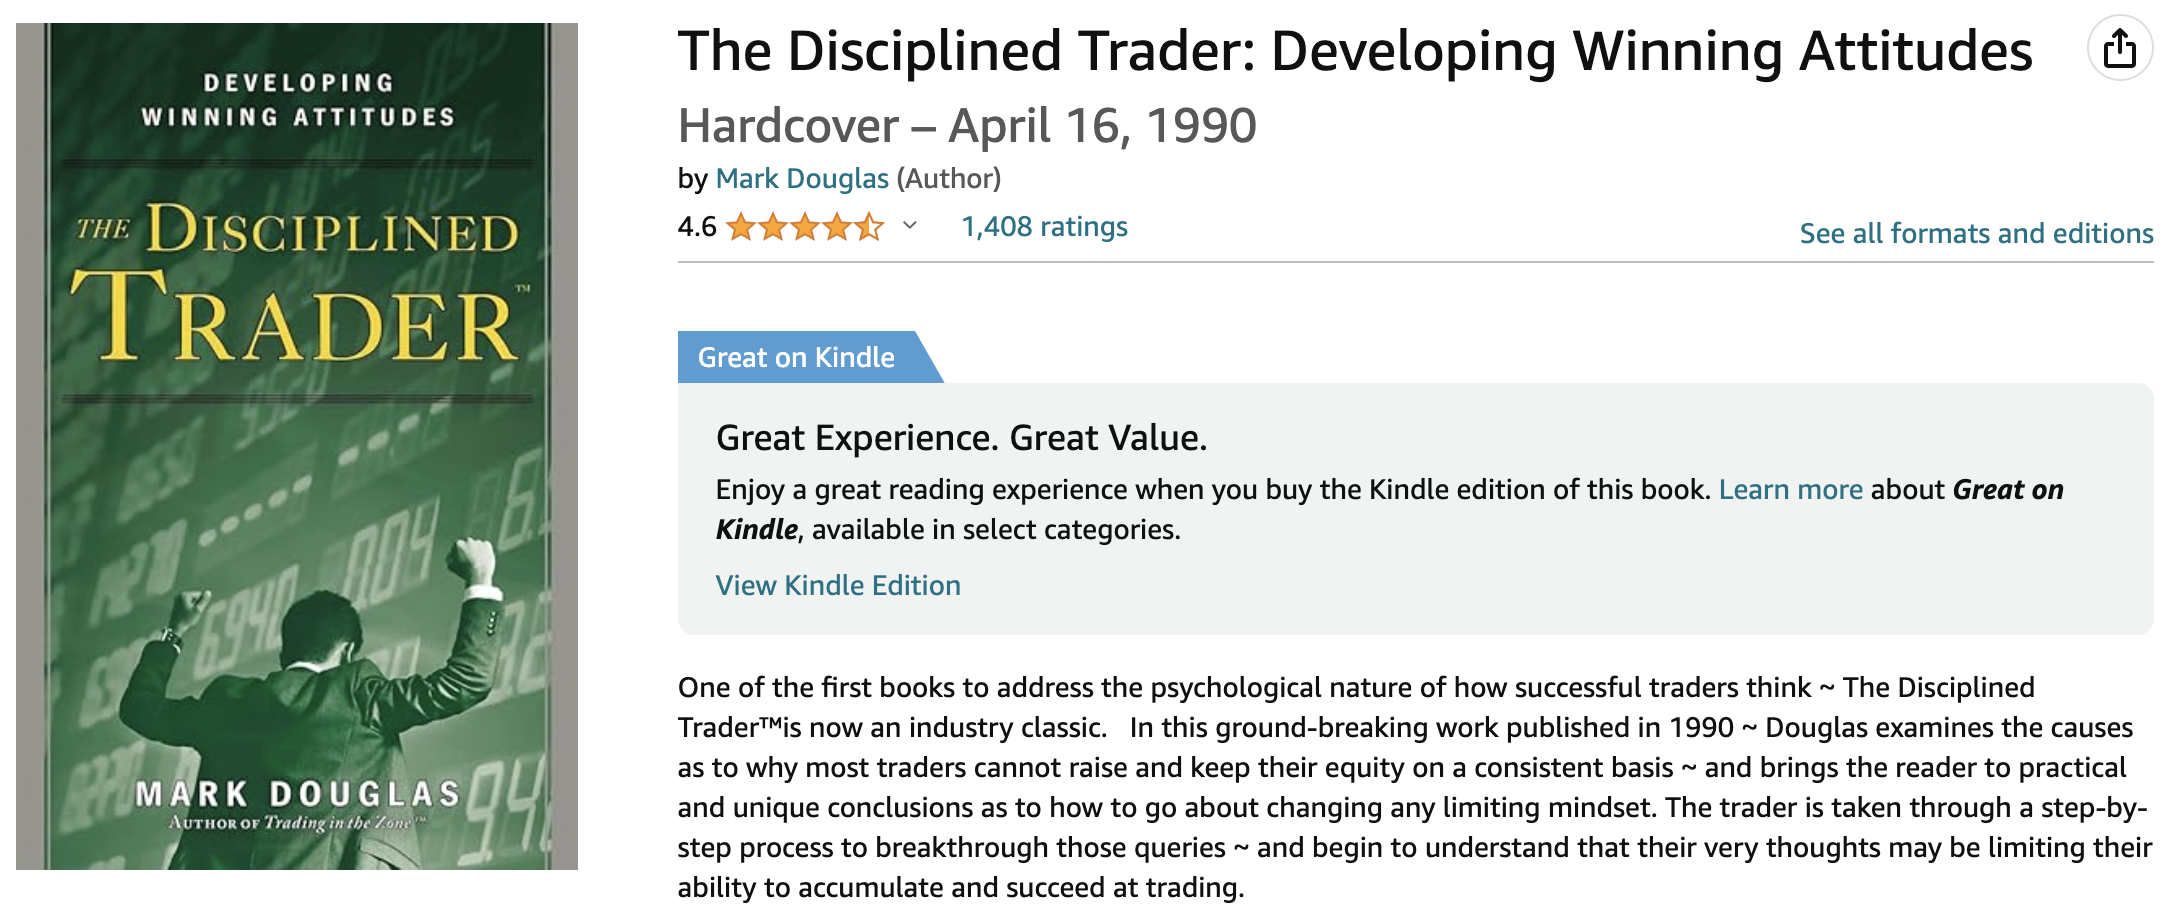 Books for Stock Traders: “The Disciplined Trader: Developing Winning Attitudes” by Mark Douglas